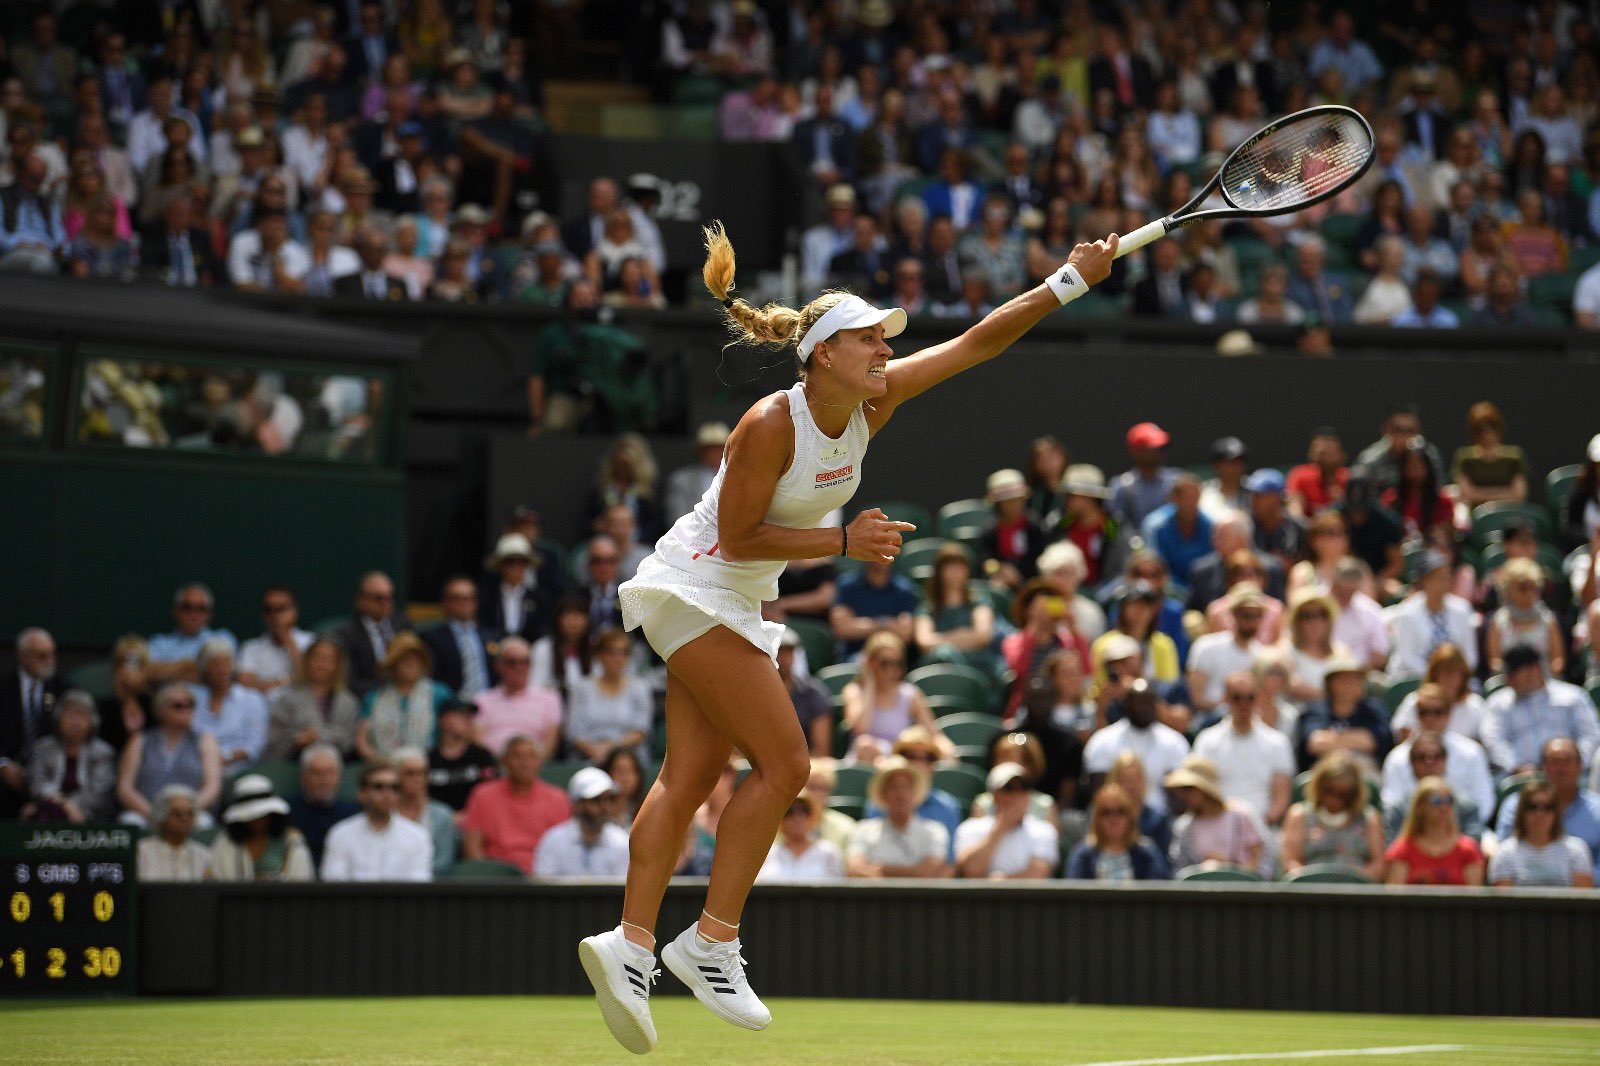 Tennis-Kerber reaches fourth round in Melbourne with win over Giorgi